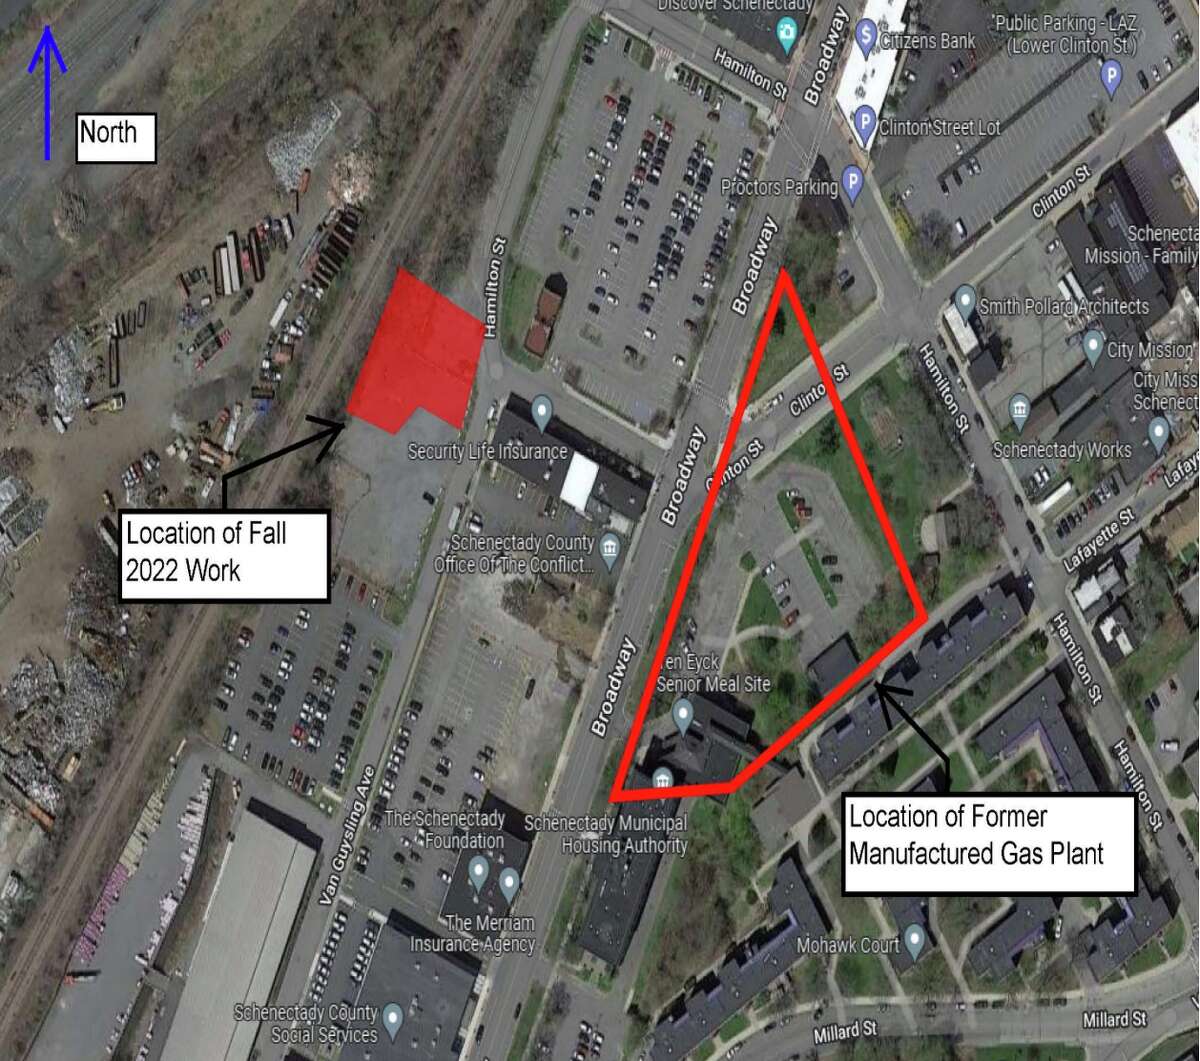 National Grid will cleanup a polluted Superfund site west of Broadway near the railroad embankment in downtown Schenectady, according to the state Department of Environmental Conservation, which announced the effort on Sept. 28, 2022.